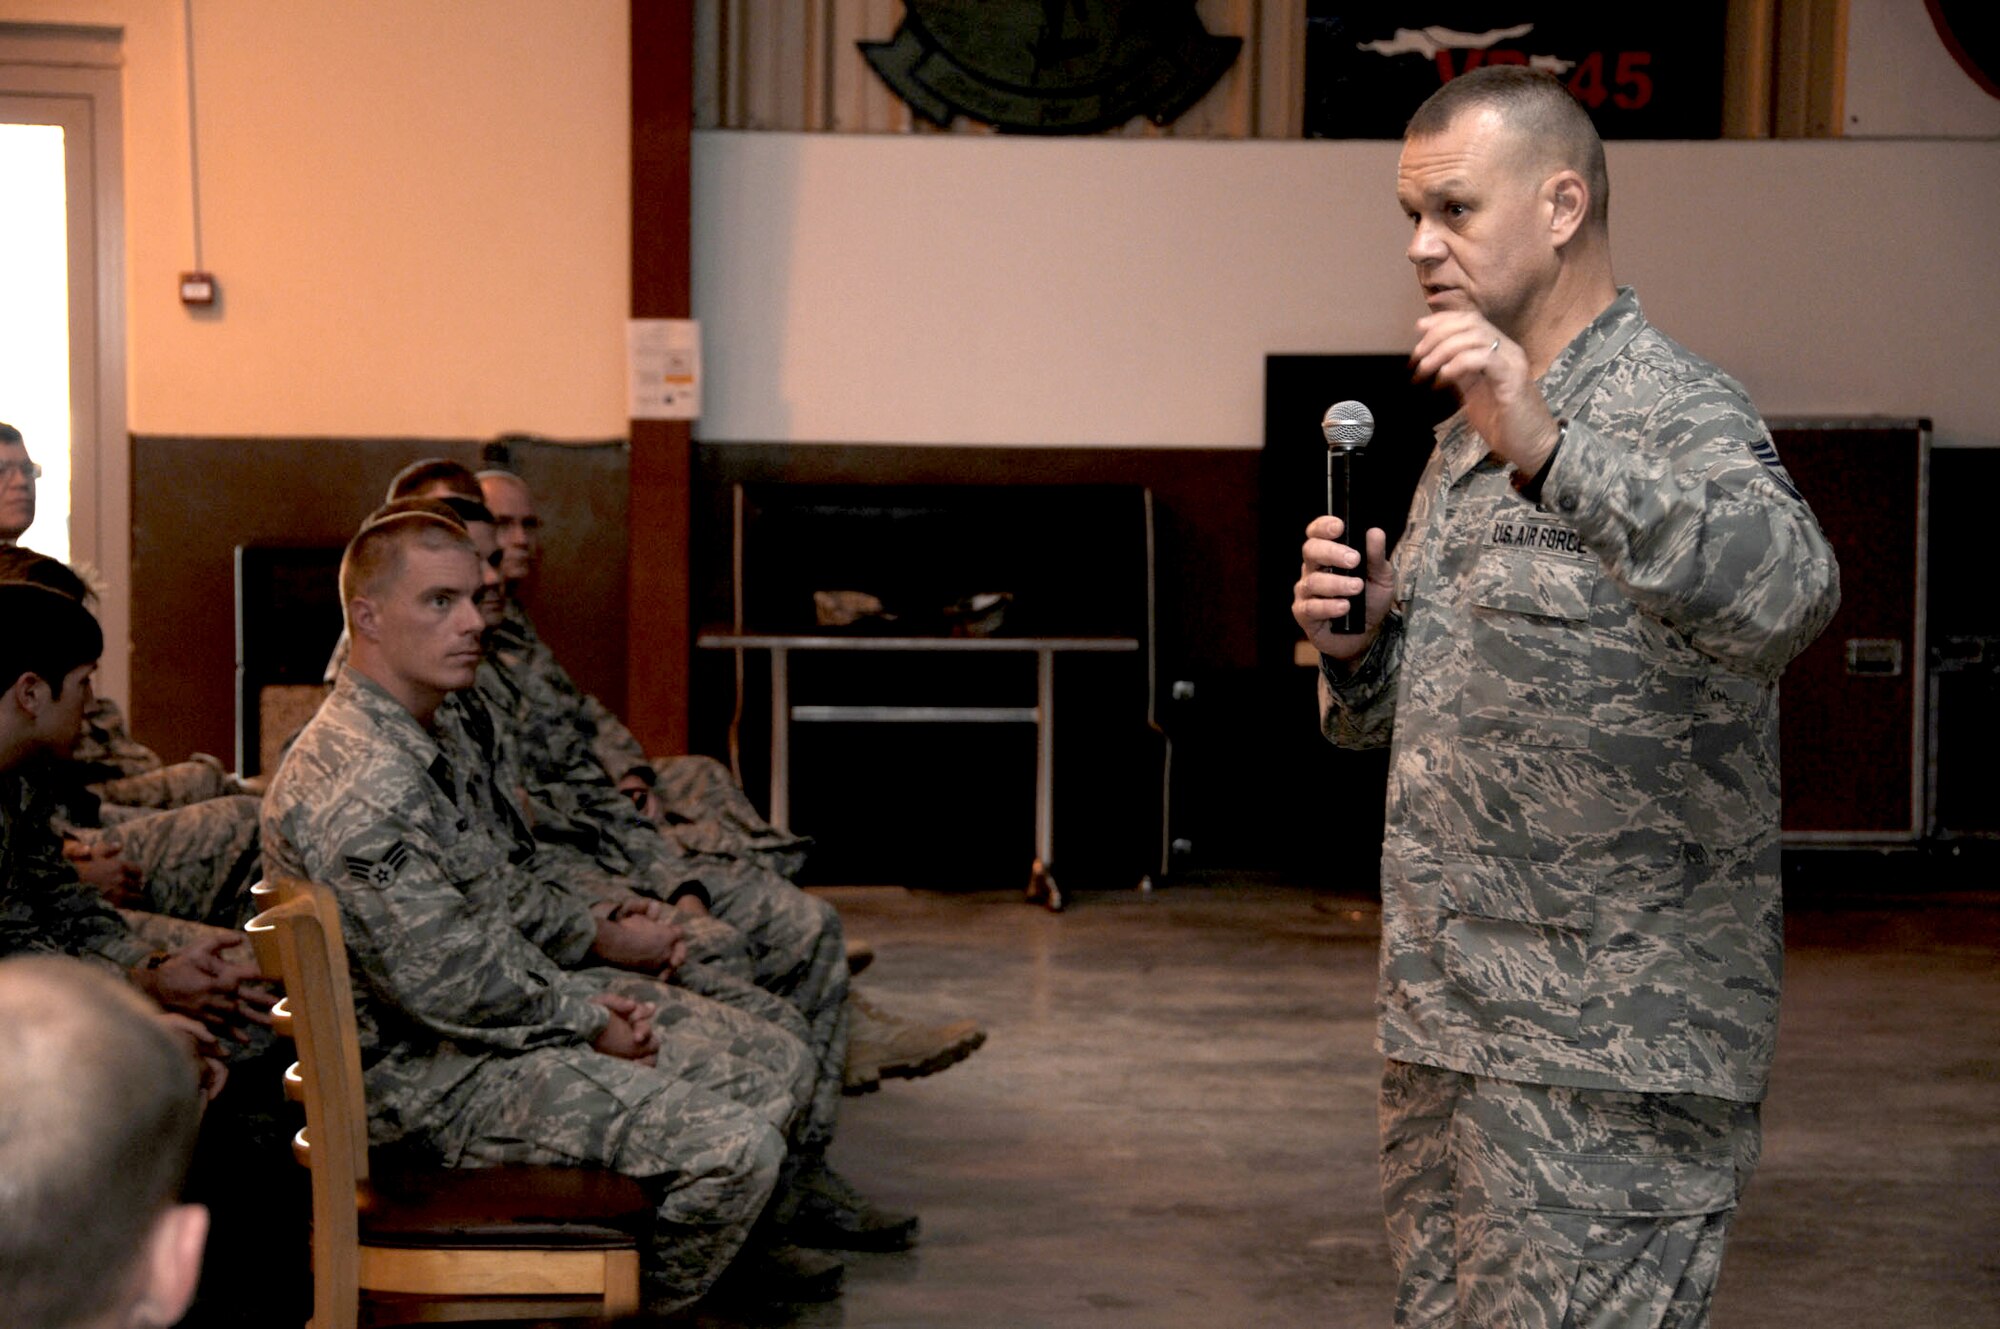 Chief Master Sgt. of the Air Force James A. Roy speaks to Airmen at an enlisted call Oct. 13, 2010, at Camp Lemonnier, Djibouti. During the call, Chief Roy explained his office?s main focus areas: being ready for joint and coalition operations, deliberate development and building resiliency. (U.S. Air Force photo/Master Sgt. James Fisher)